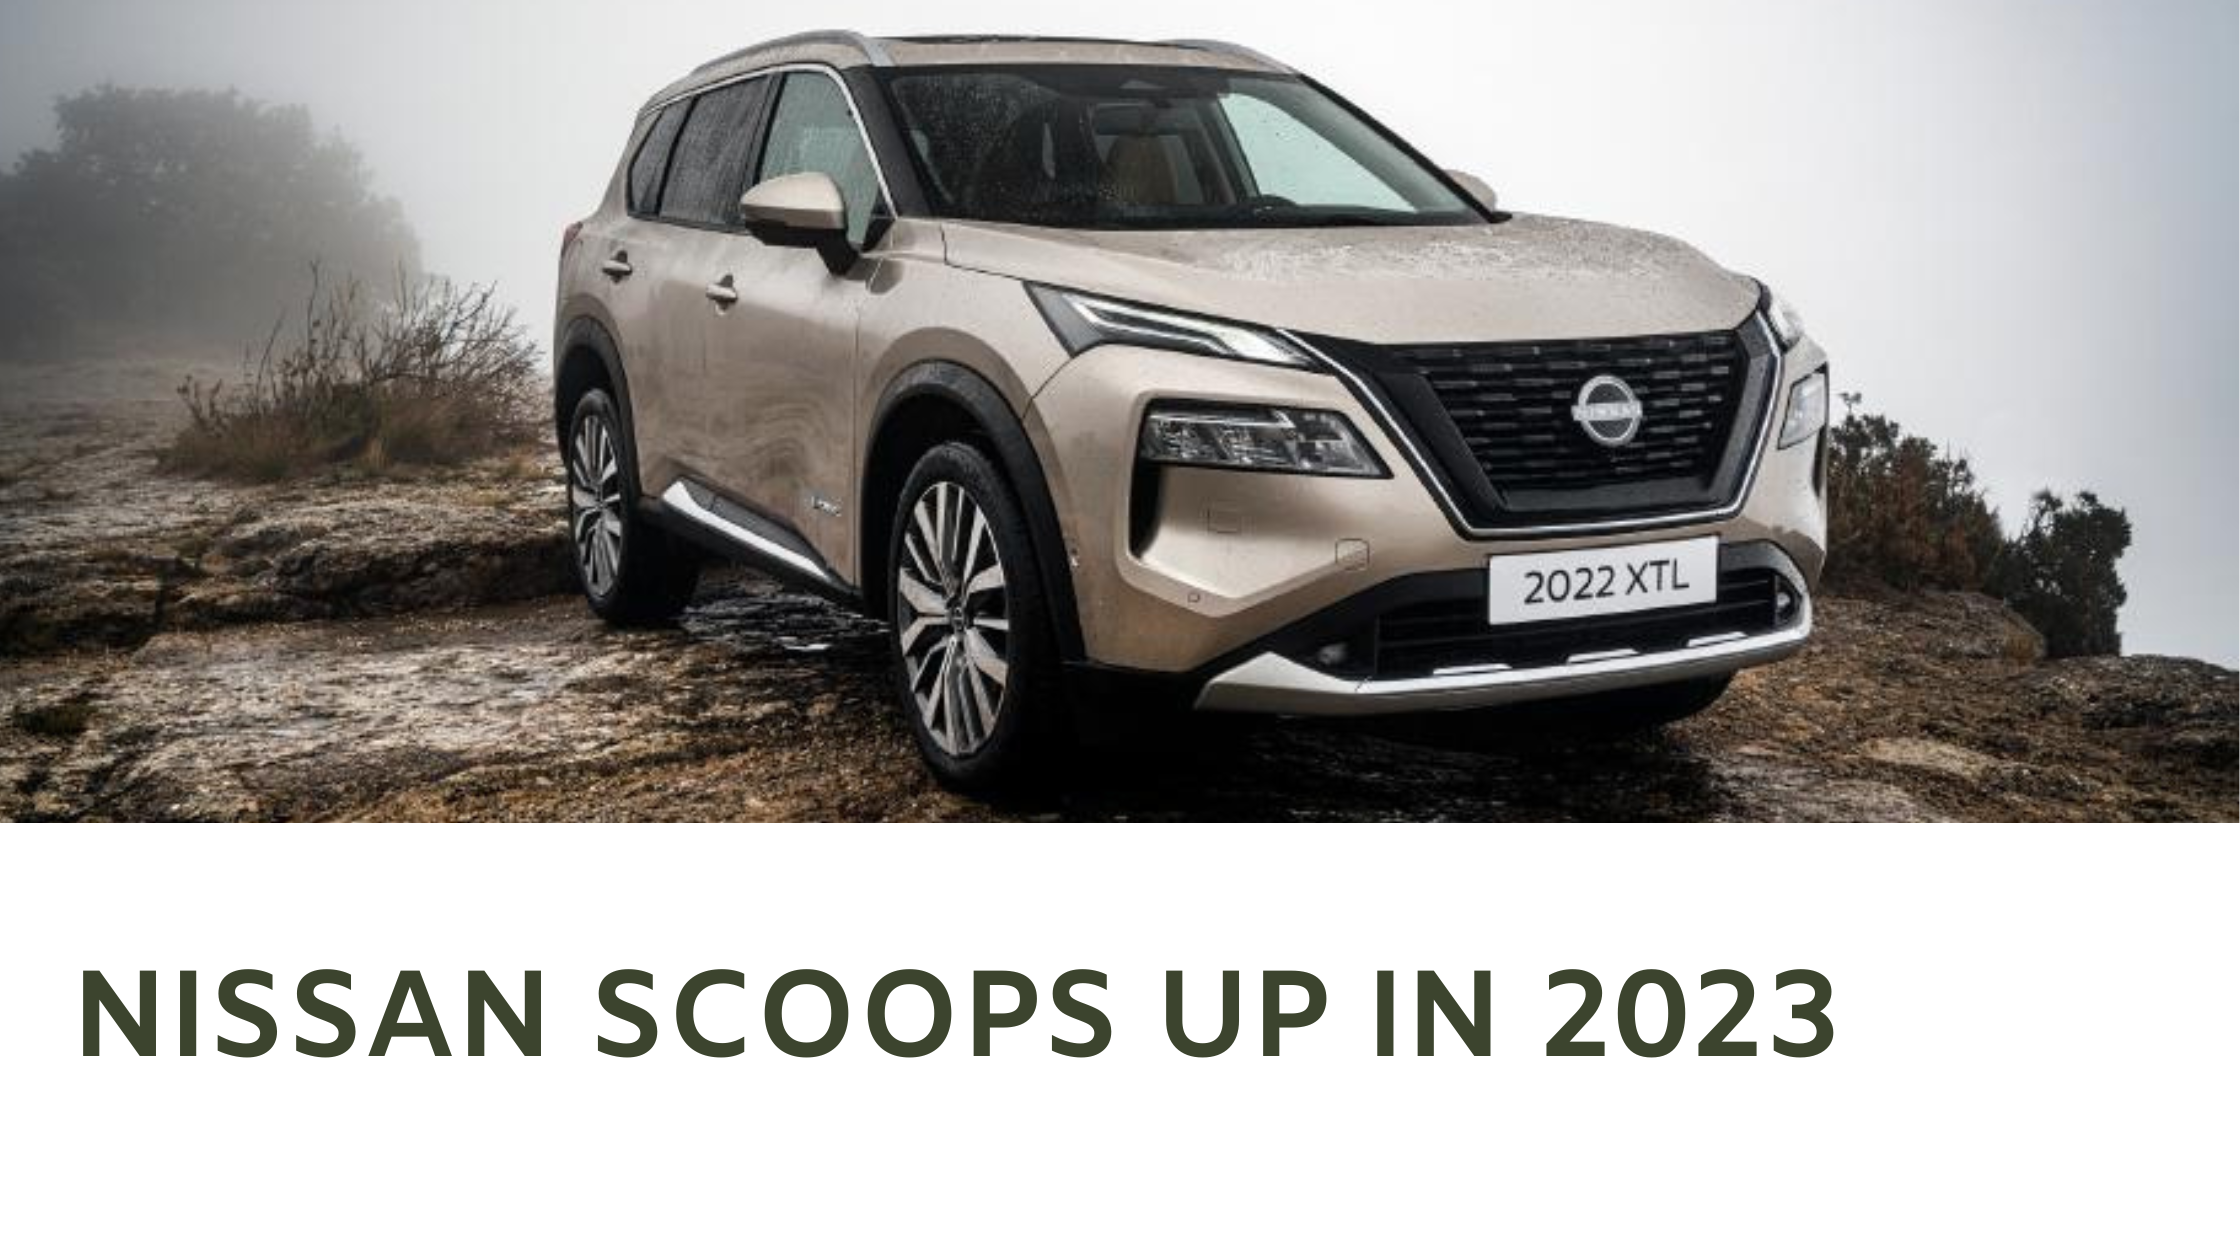 Nissan Scoops Up in 2023